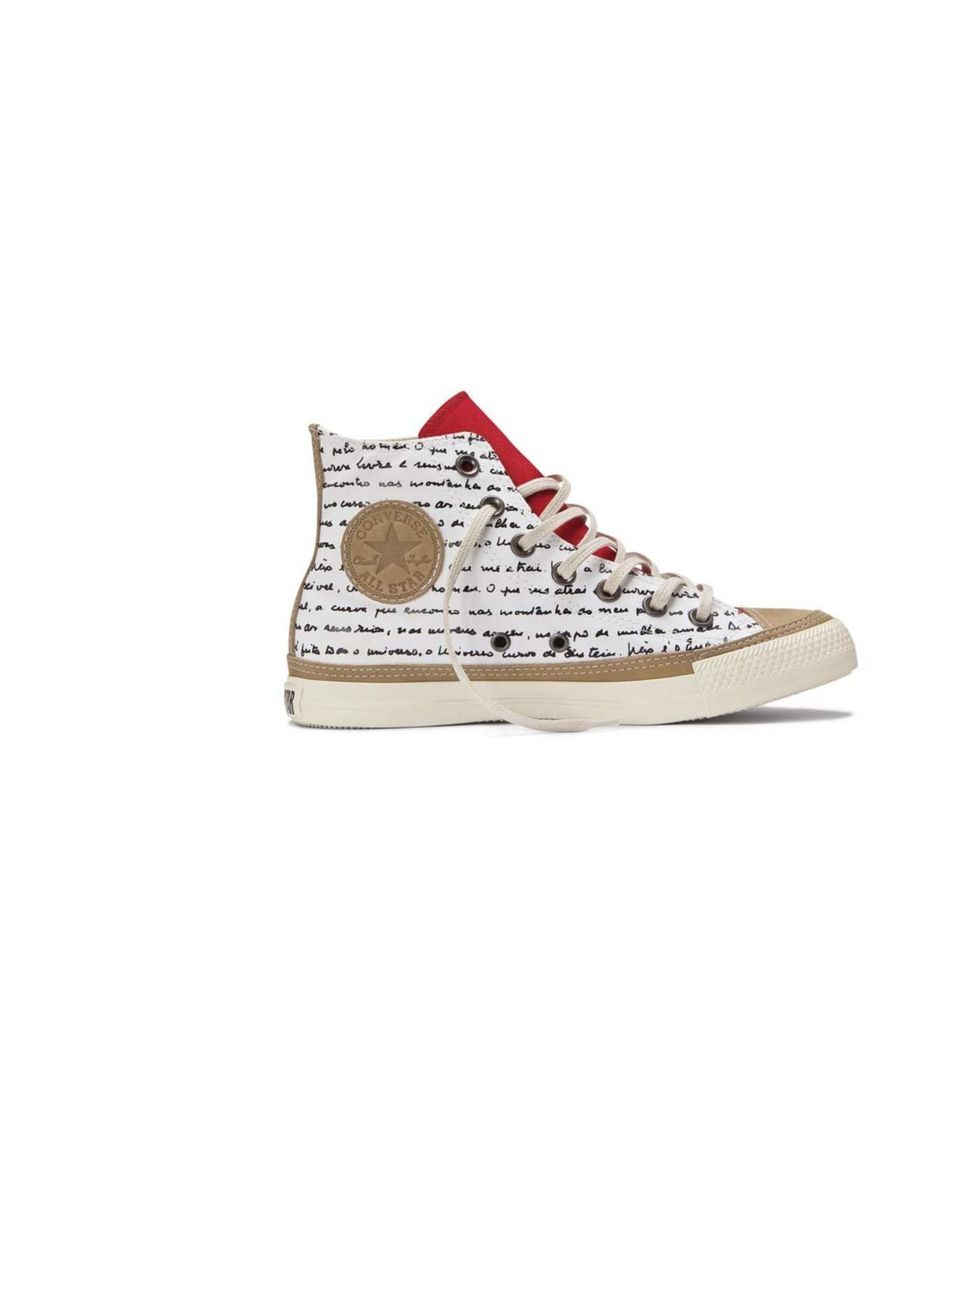 <p>Brazilian architect Oscar Niemeyer has launched a collection of designs for Converse, including this pair of high-tops containing a political message.</p>